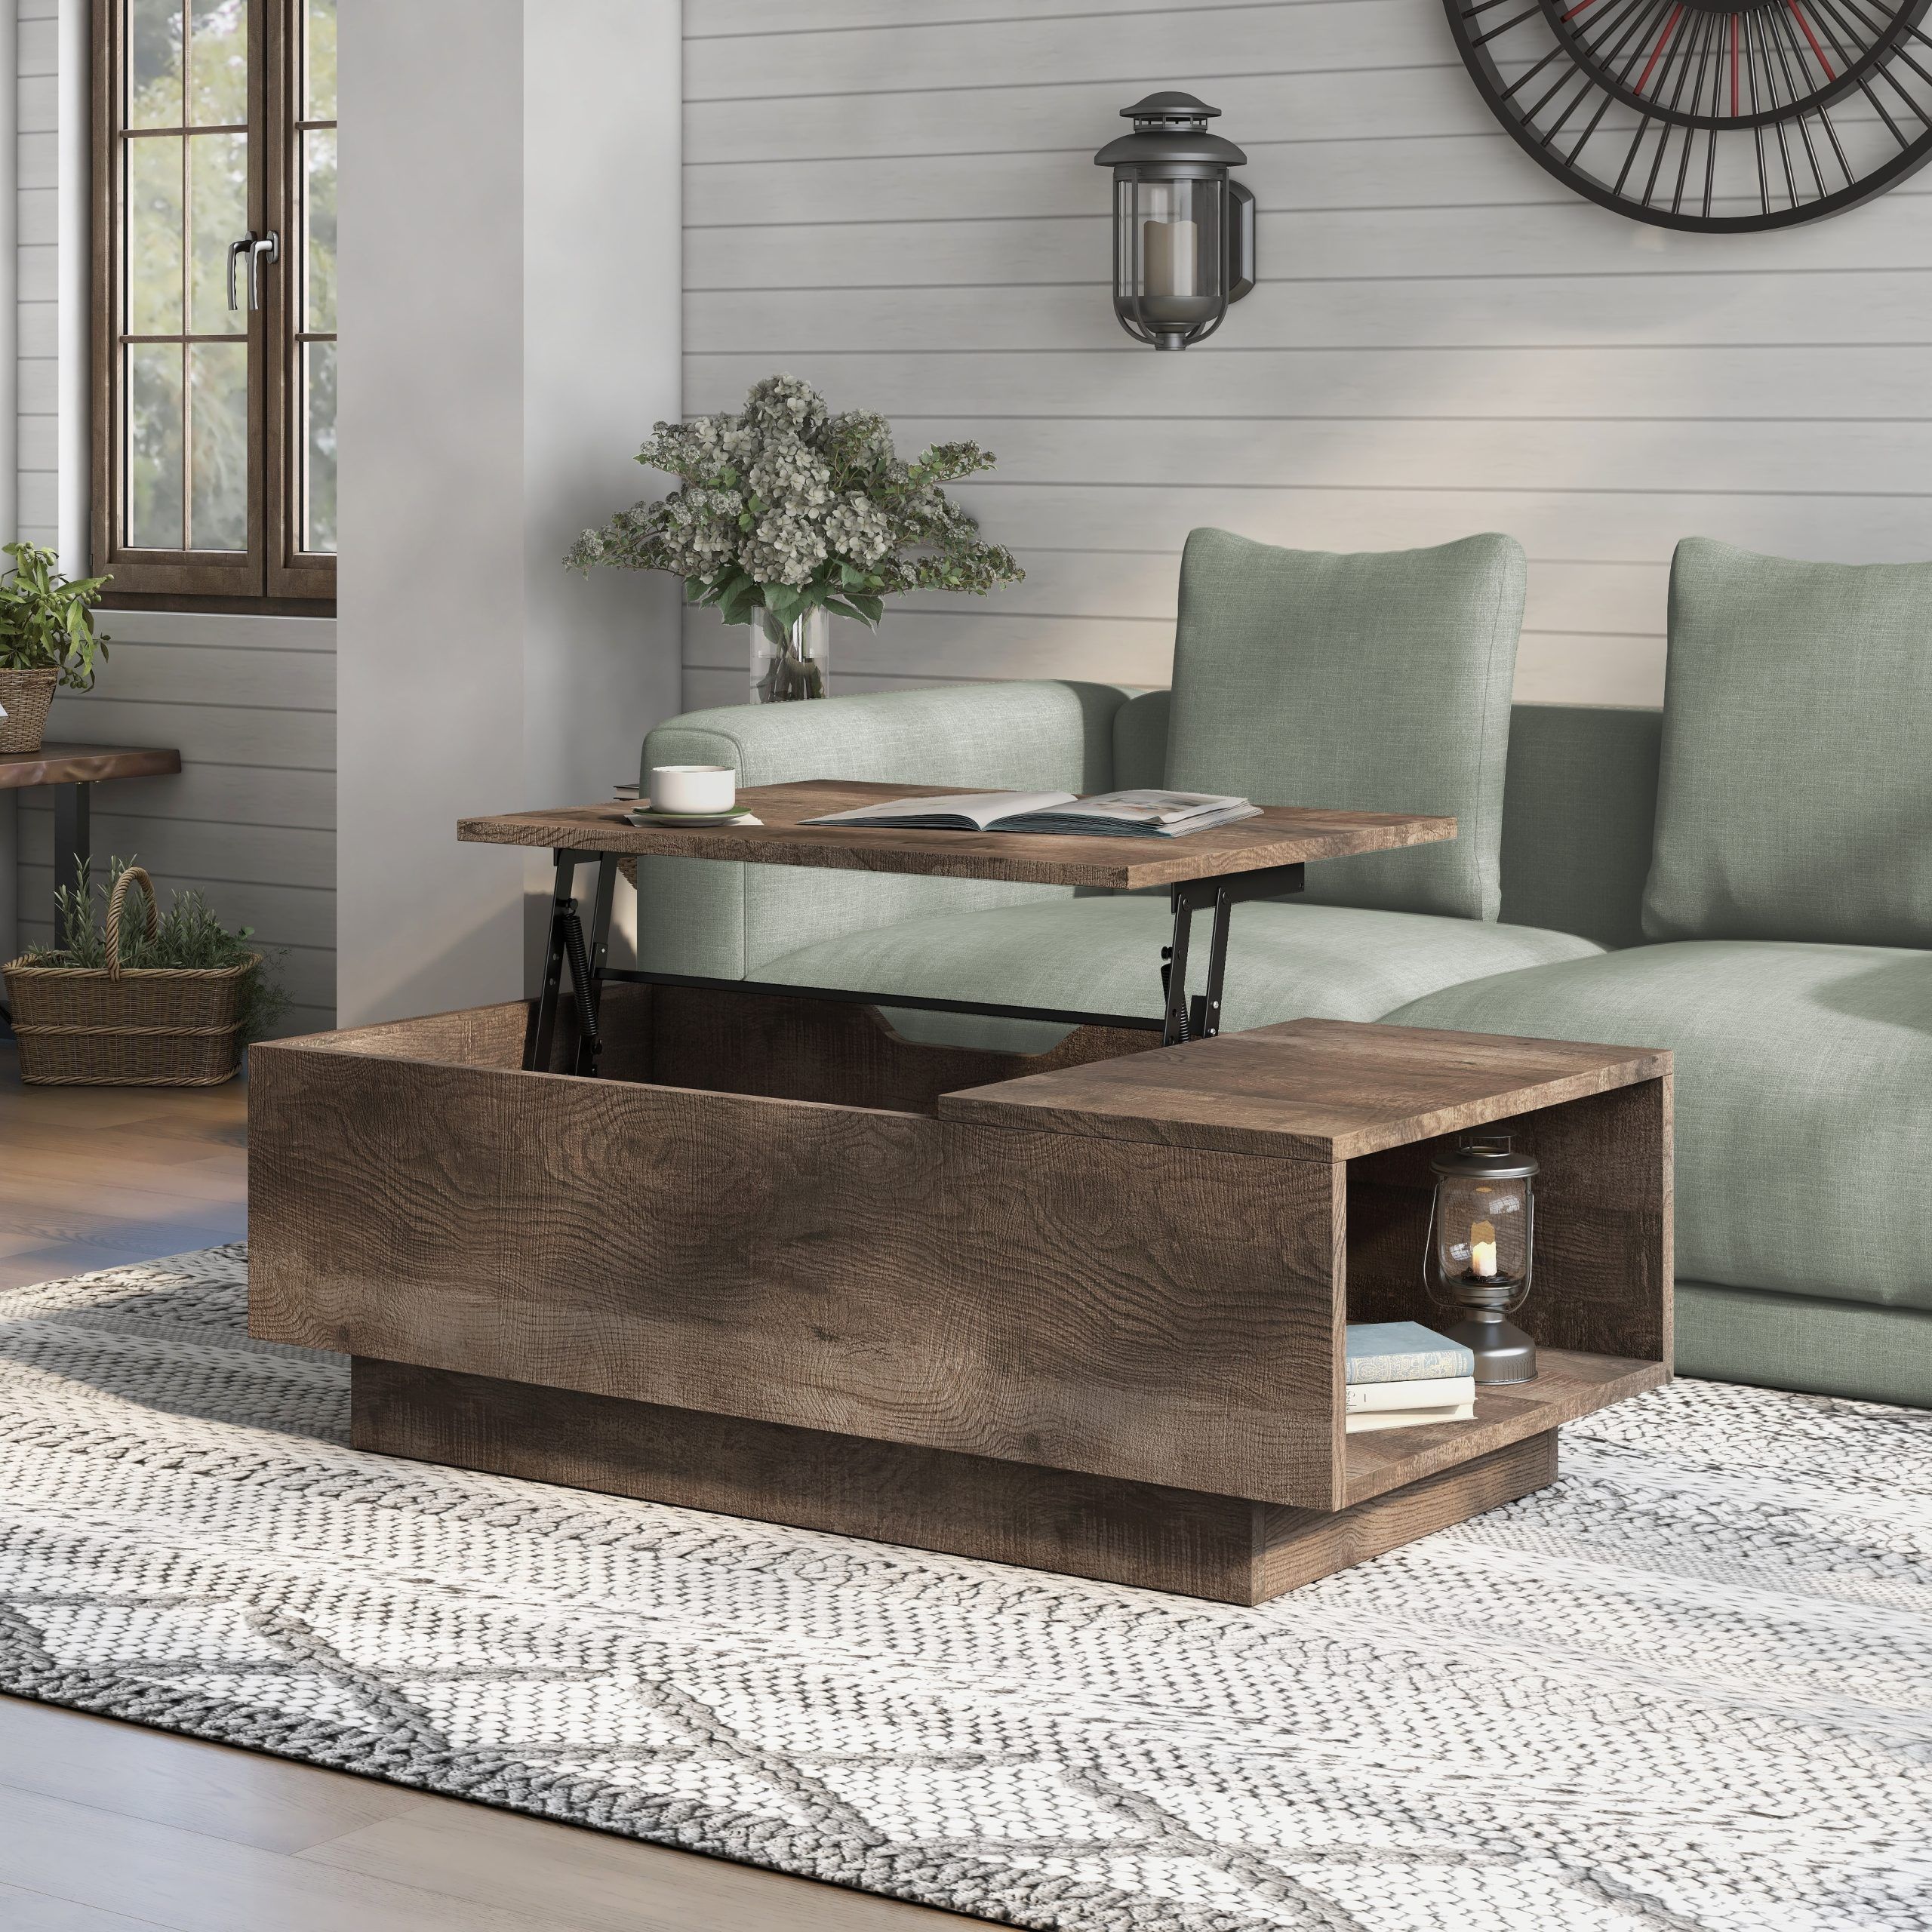 Uver Rustic 47 Inch 1 Shelf Lift Top Coffee Tablefurniture Of America –  On Sale – Bed Bath & Beyond – 25364296 Throughout Wood Lift Top Coffee Tables (View 4 of 15)